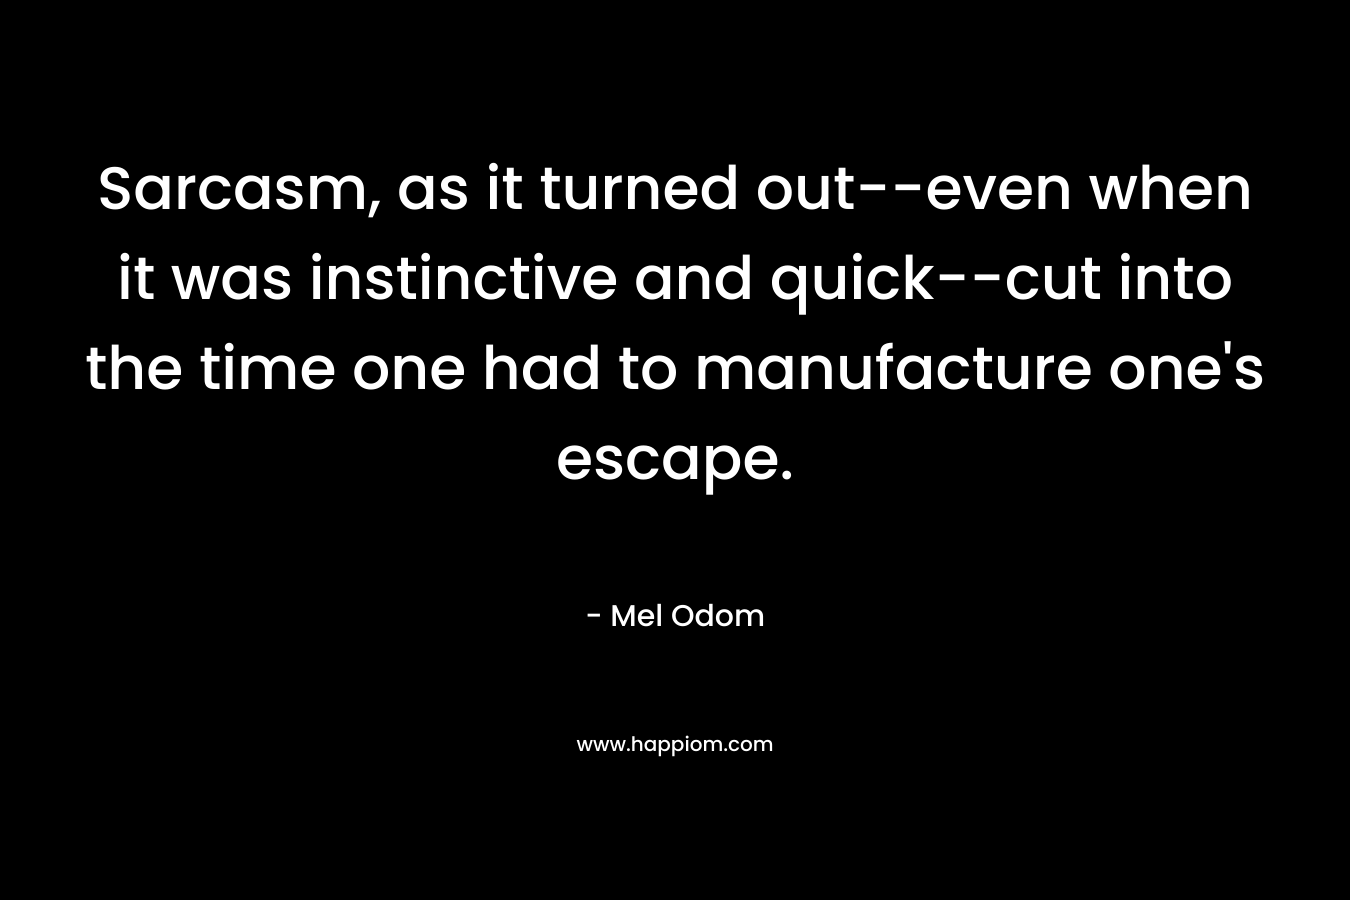 Sarcasm, as it turned out--even when it was instinctive and quick--cut into the time one had to manufacture one's escape.